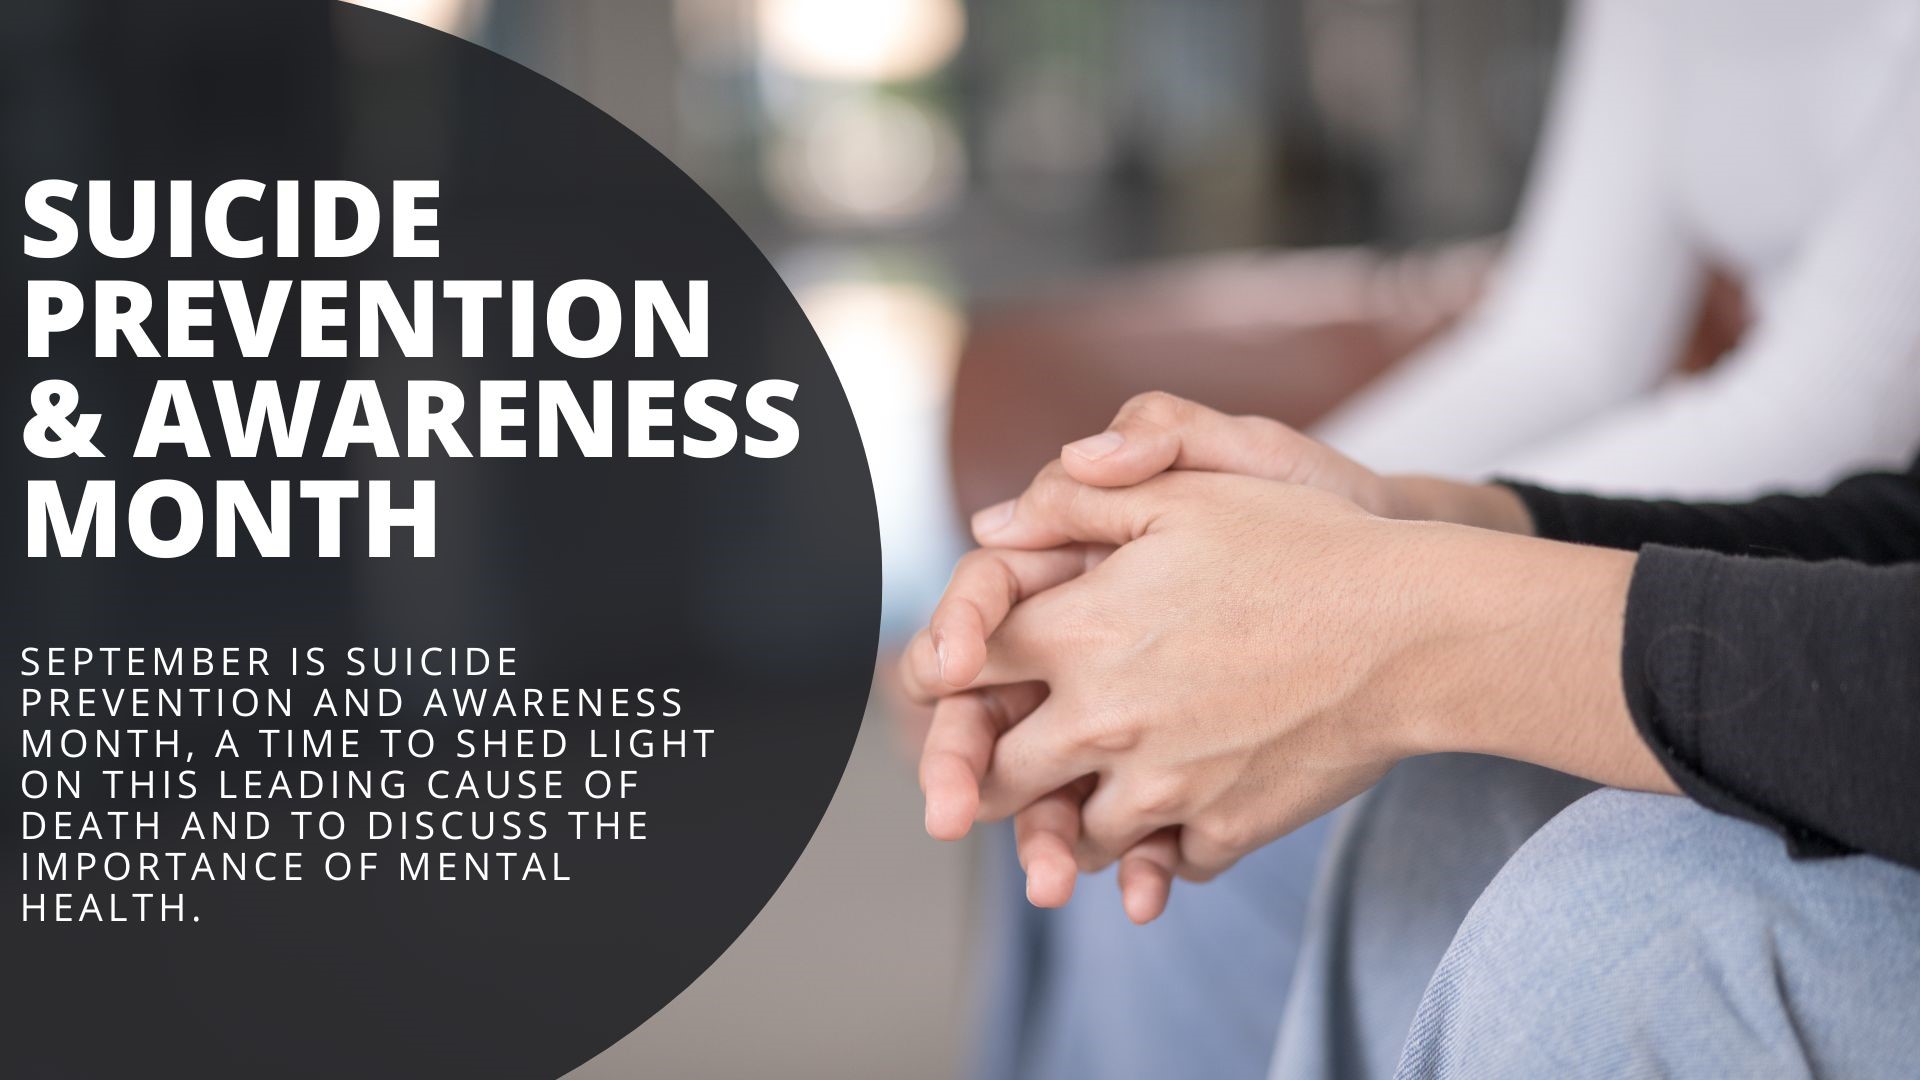 September is suicide prevention and awareness month, a time to shed light on this leading cause of death and to discuss the importance of mental health.